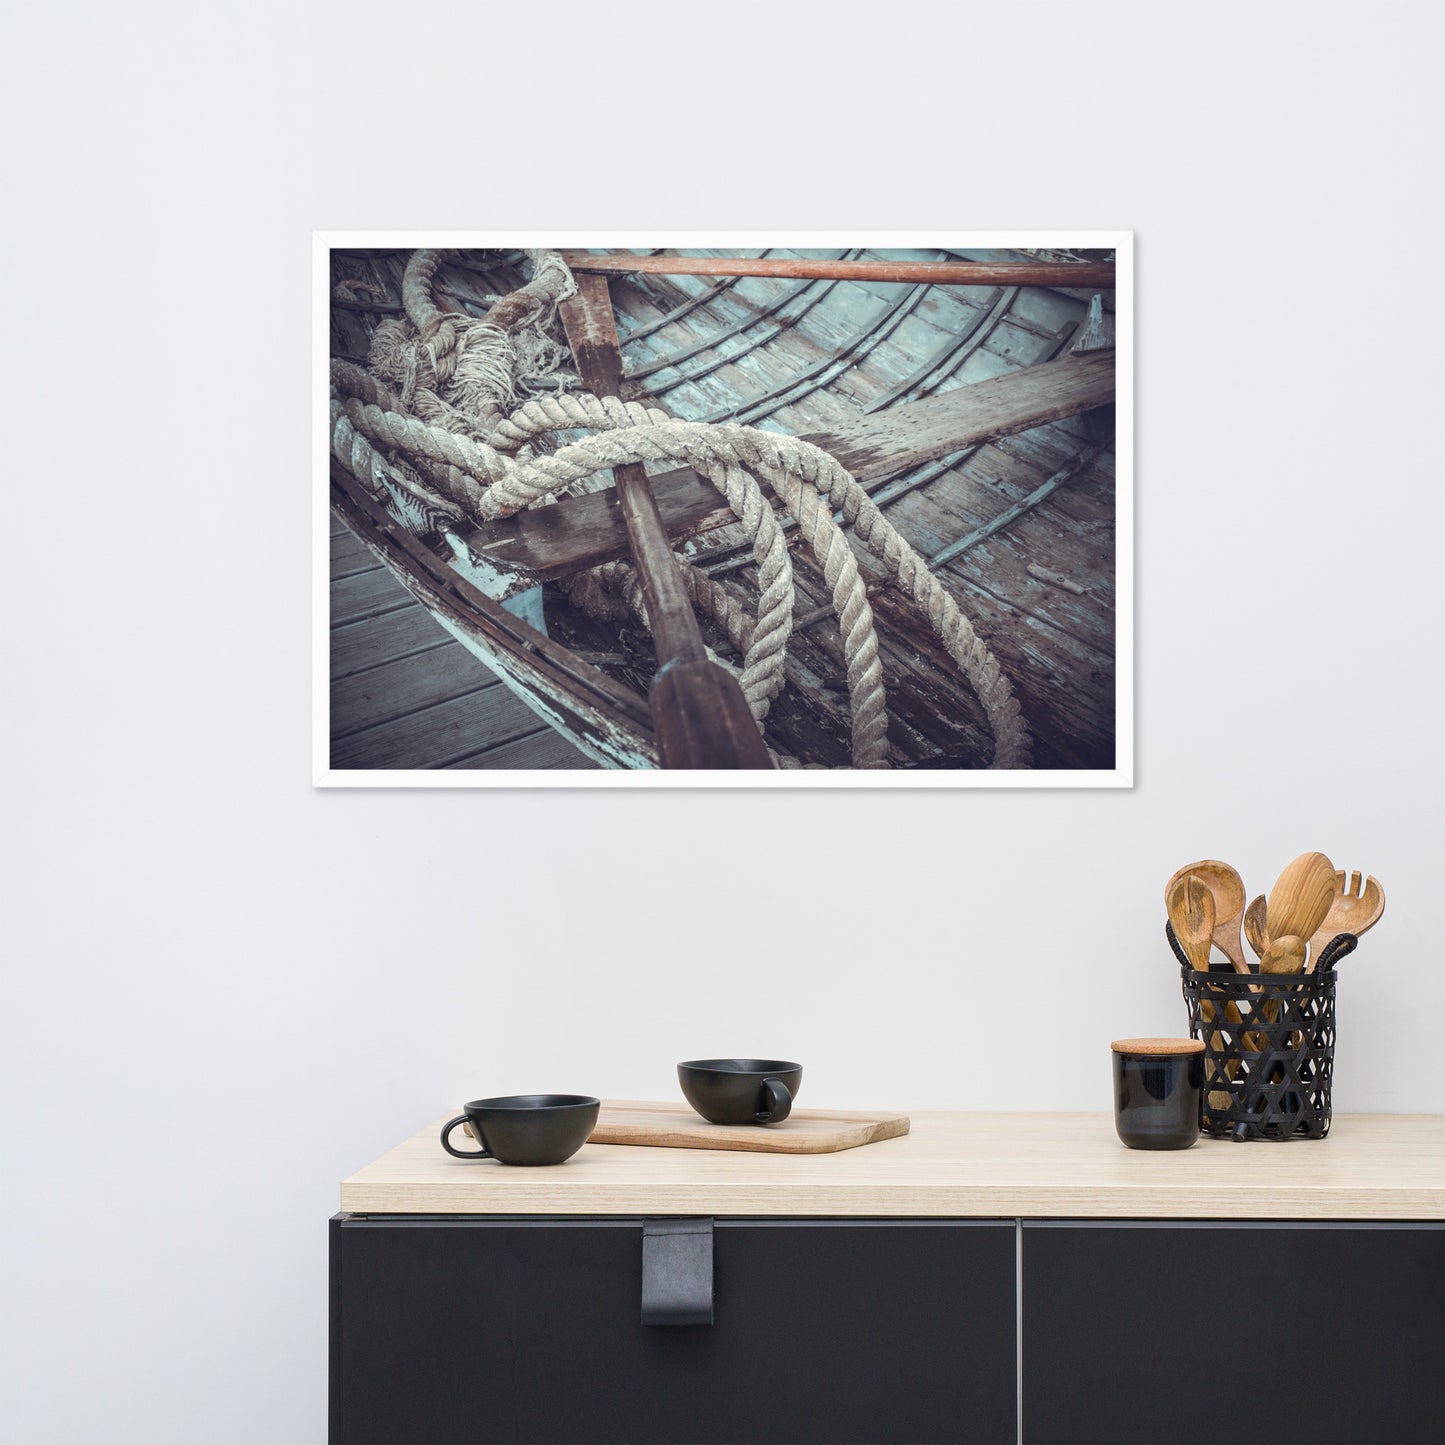 Vintage Boat Oars and Ropes Nautical Framed Wall Art Prints